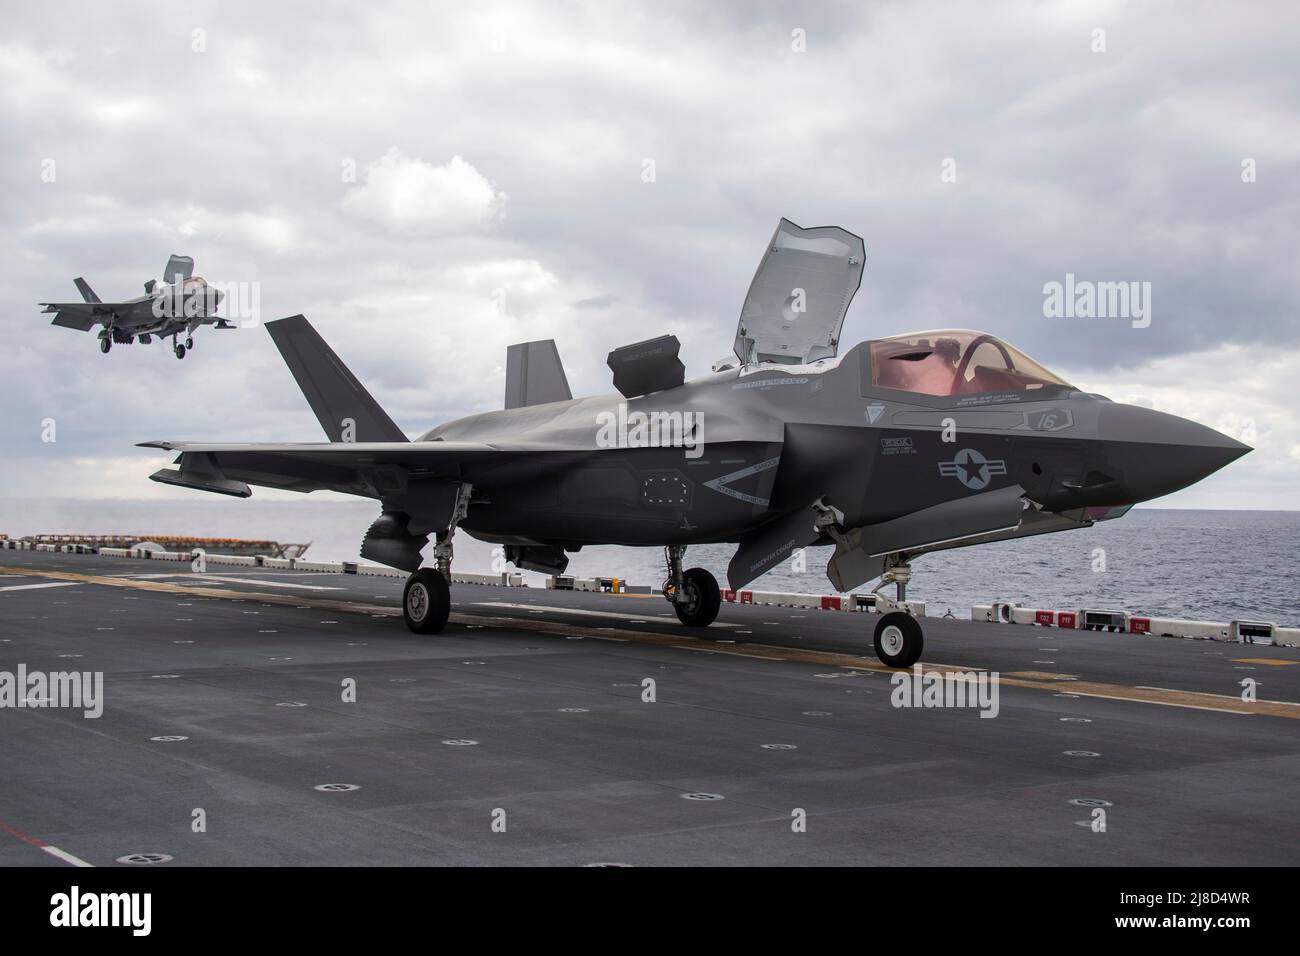 A U.S. Marine Corps F-35B Lightning II fighter aircraft, attached to the Dragons of Marine Medium Tiltrotor Squadron 265, launches from the flight deck of the America-class amphibious assault ship USS America, January 9, 2021 operating on the Philippine Sea. Stock Photo